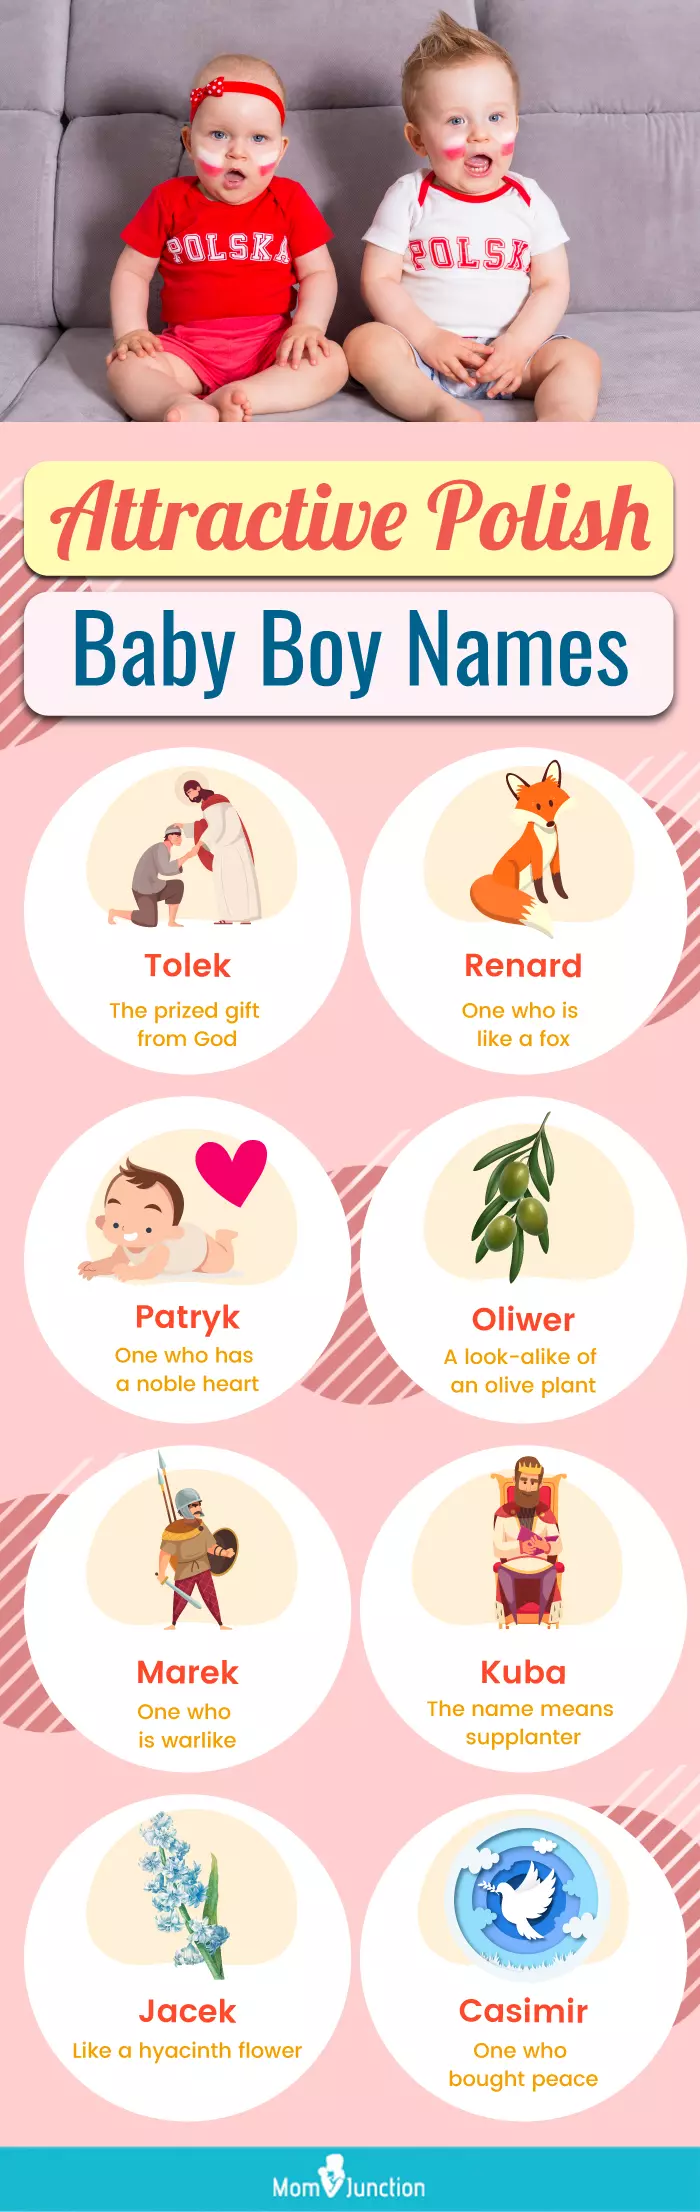 attractive polish baby boy names (infographic)